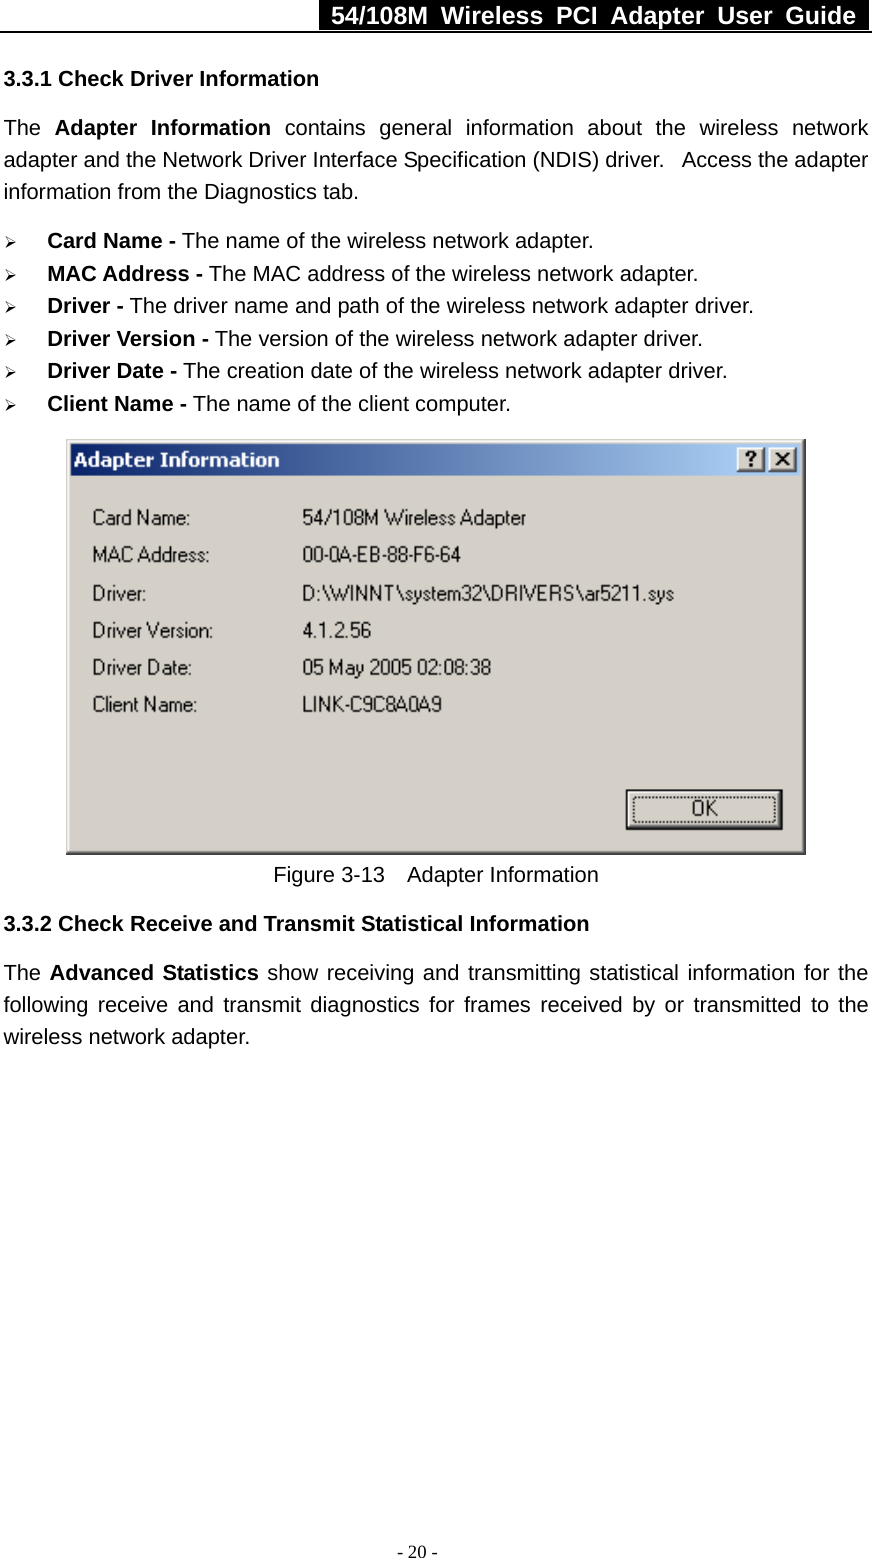   54/108M Wireless PCI Adapter User Guide  - 20 - 3.3.1 Check Driver Information The  Adapter Information contains general information about the wireless network adapter and the Network Driver Interface Specification (NDIS) driver.   Access the adapter information from the Diagnostics tab. ¾ Card Name - The name of the wireless network adapter.   ¾ MAC Address - The MAC address of the wireless network adapter.   ¾ Driver - The driver name and path of the wireless network adapter driver. ¾ Driver Version - The version of the wireless network adapter driver. ¾ Driver Date - The creation date of the wireless network adapter driver. ¾ Client Name - The name of the client computer.    Figure 3-13  Adapter Information 3.3.2 Check Receive and Transmit Statistical Information The Advanced Statistics show receiving and transmitting statistical information for the following receive and transmit diagnostics for frames received by or transmitted to the wireless network adapter. 